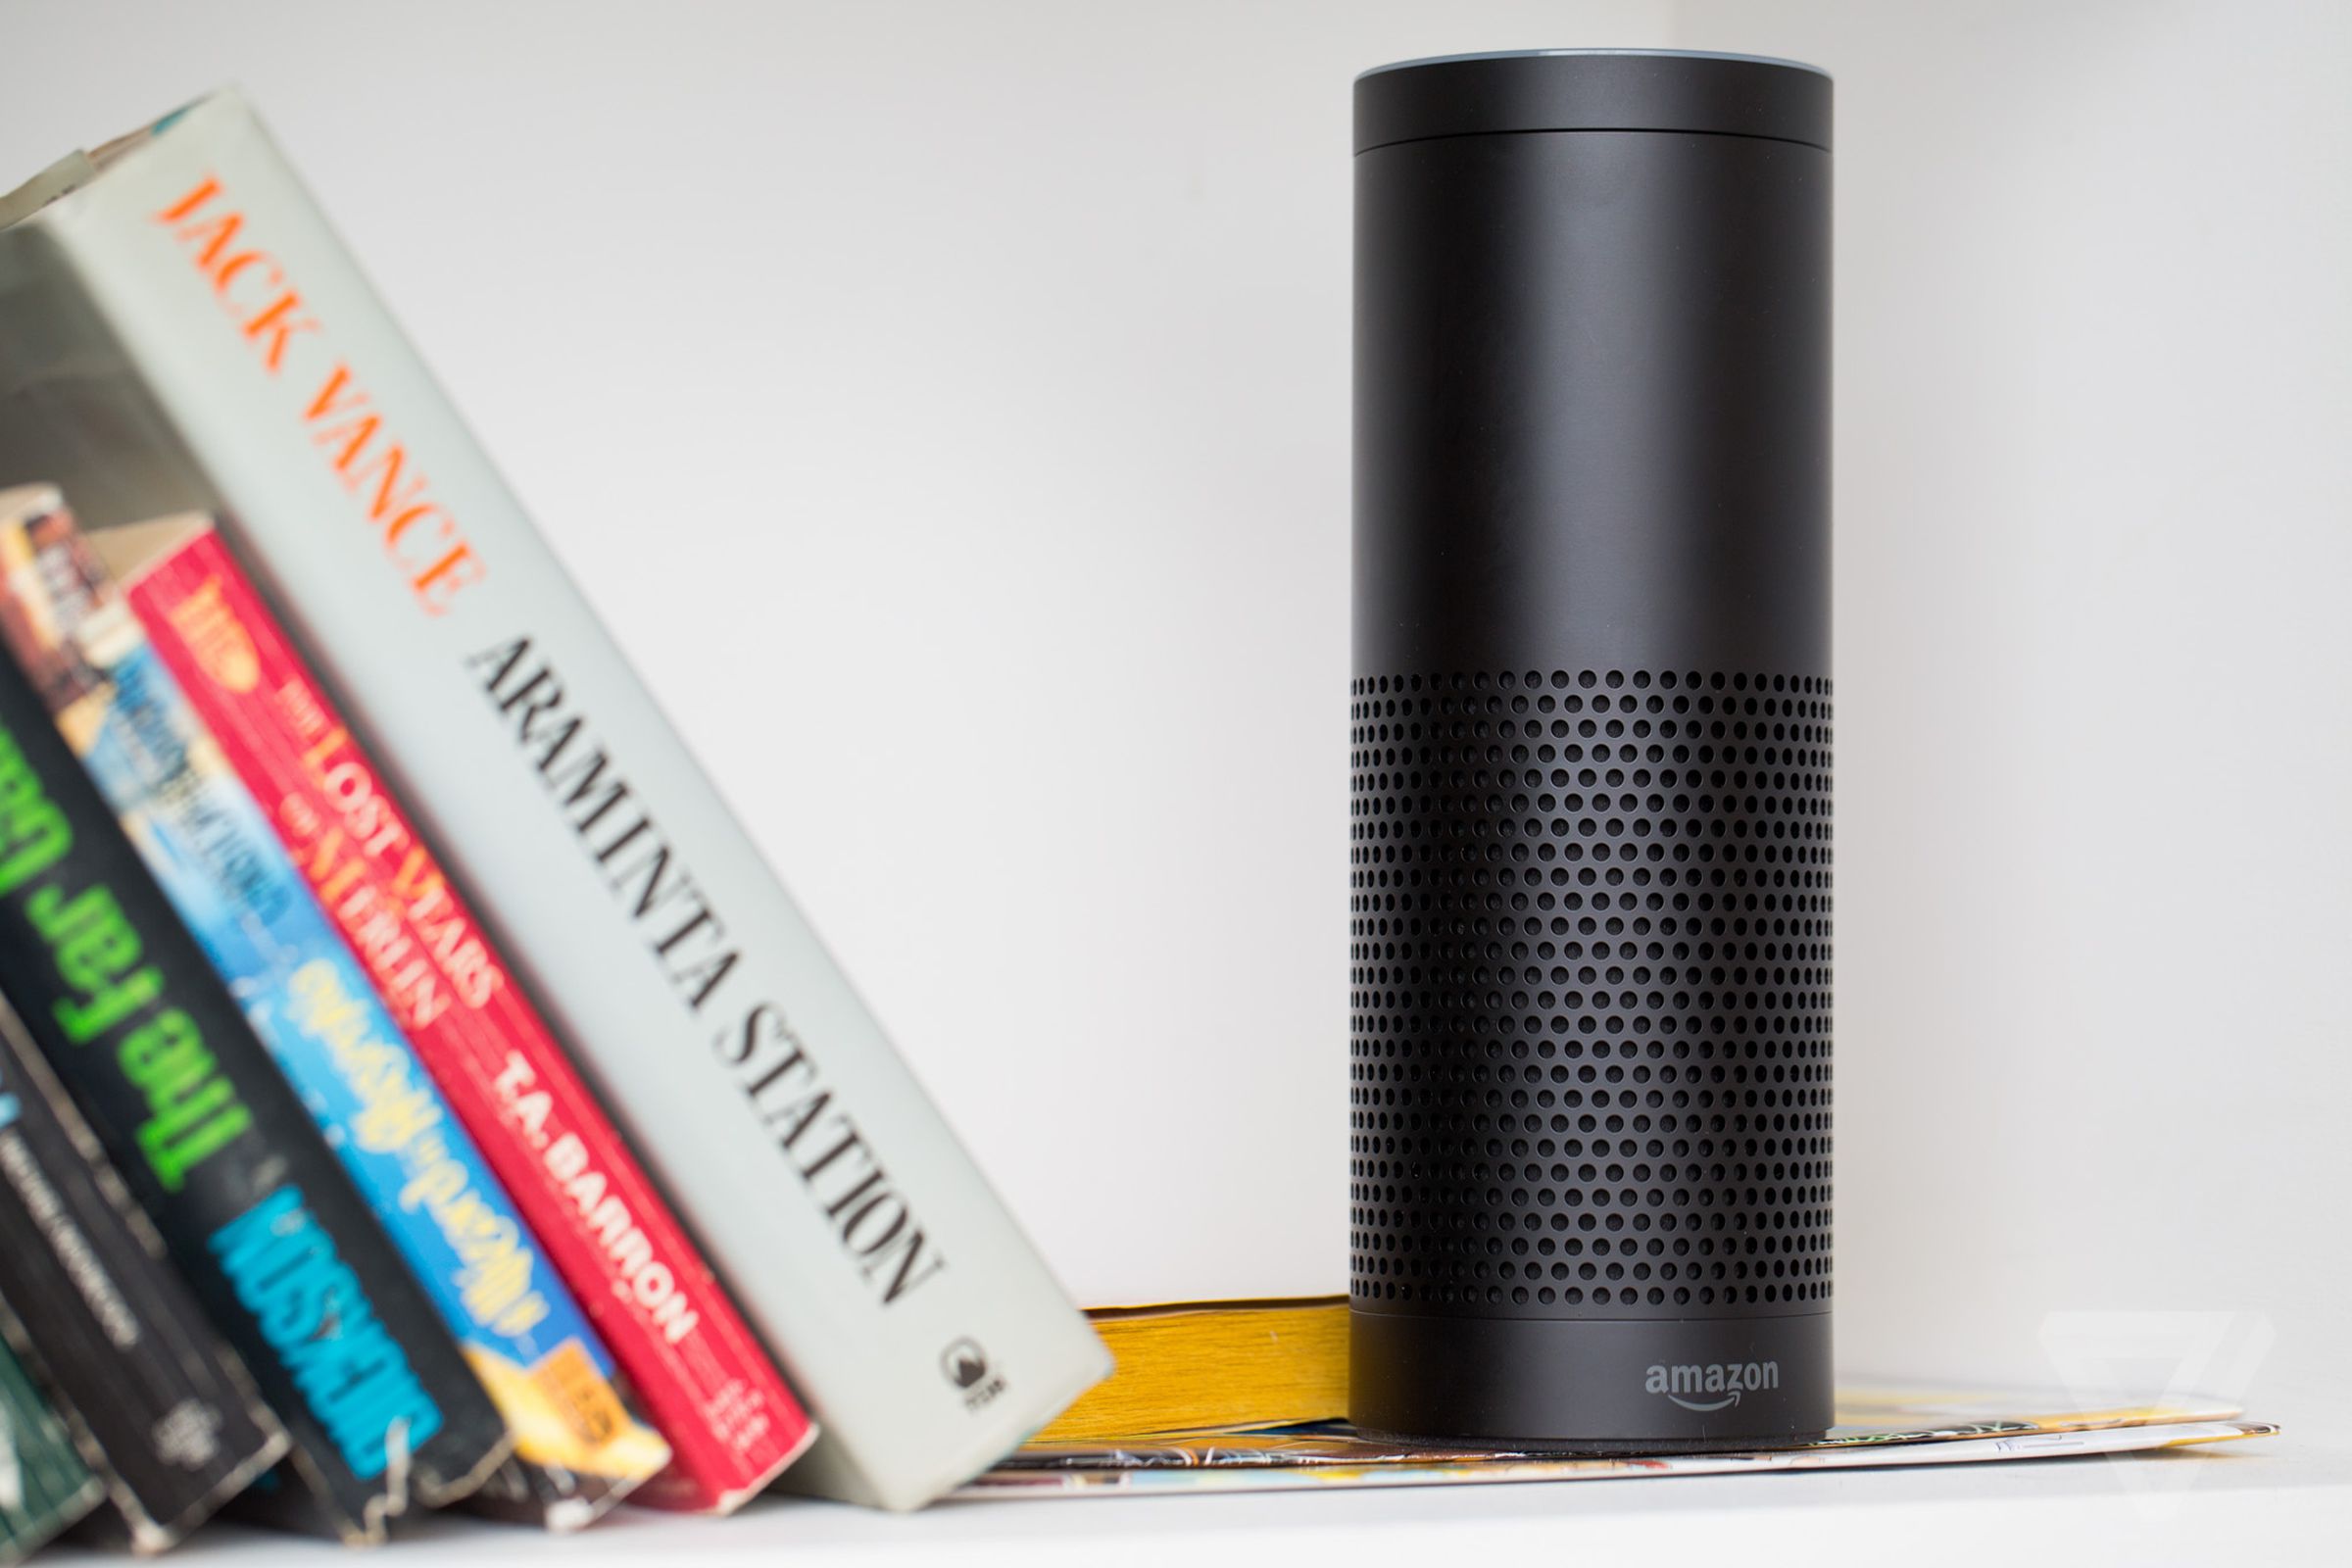 “We’ve come a long way, baby.” The original Echo smart speaker arrived in 2014.